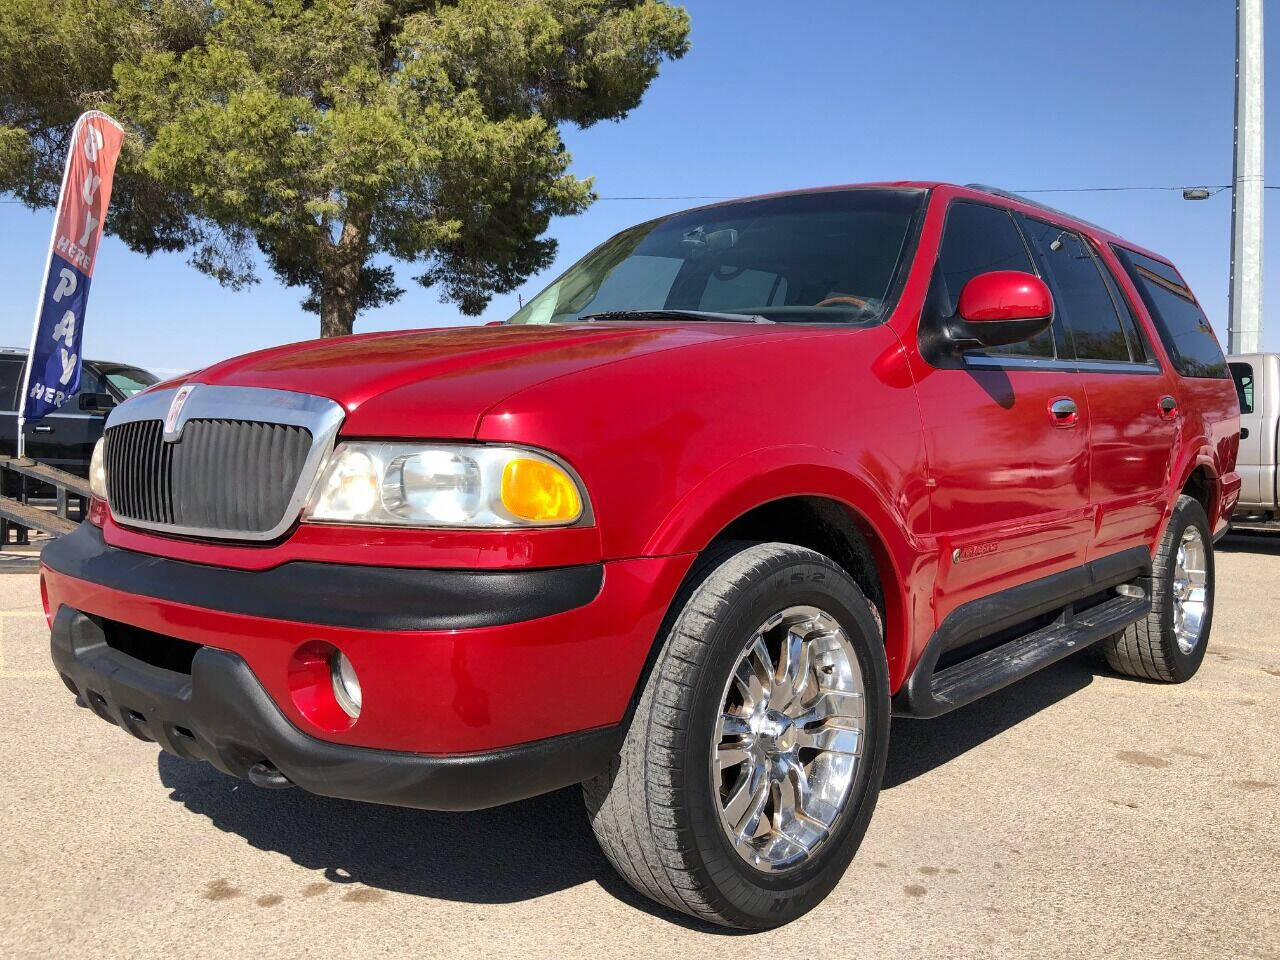 2000 lincoln navigator lifted truck